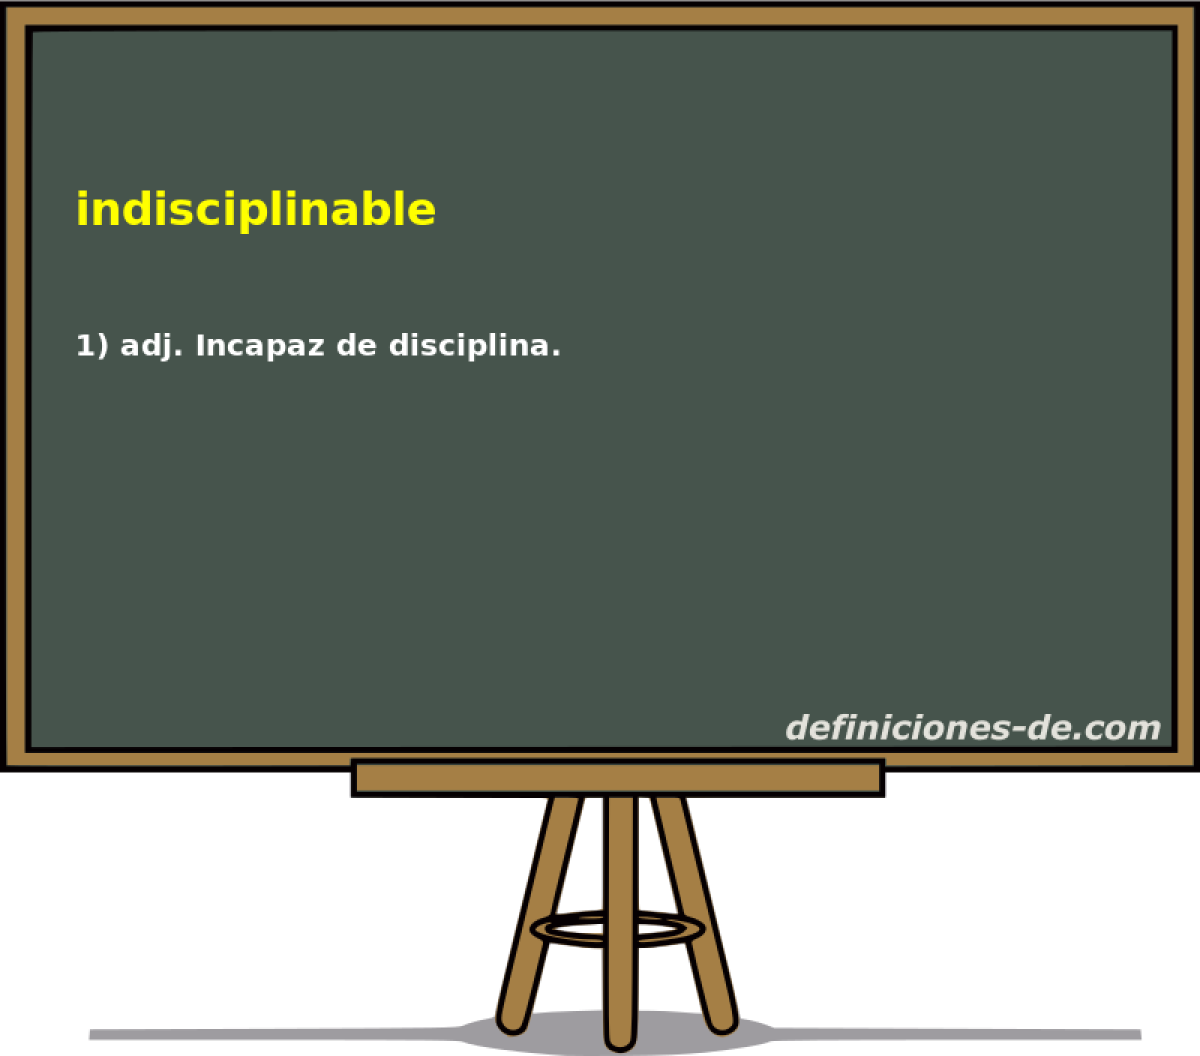 indisciplinable 